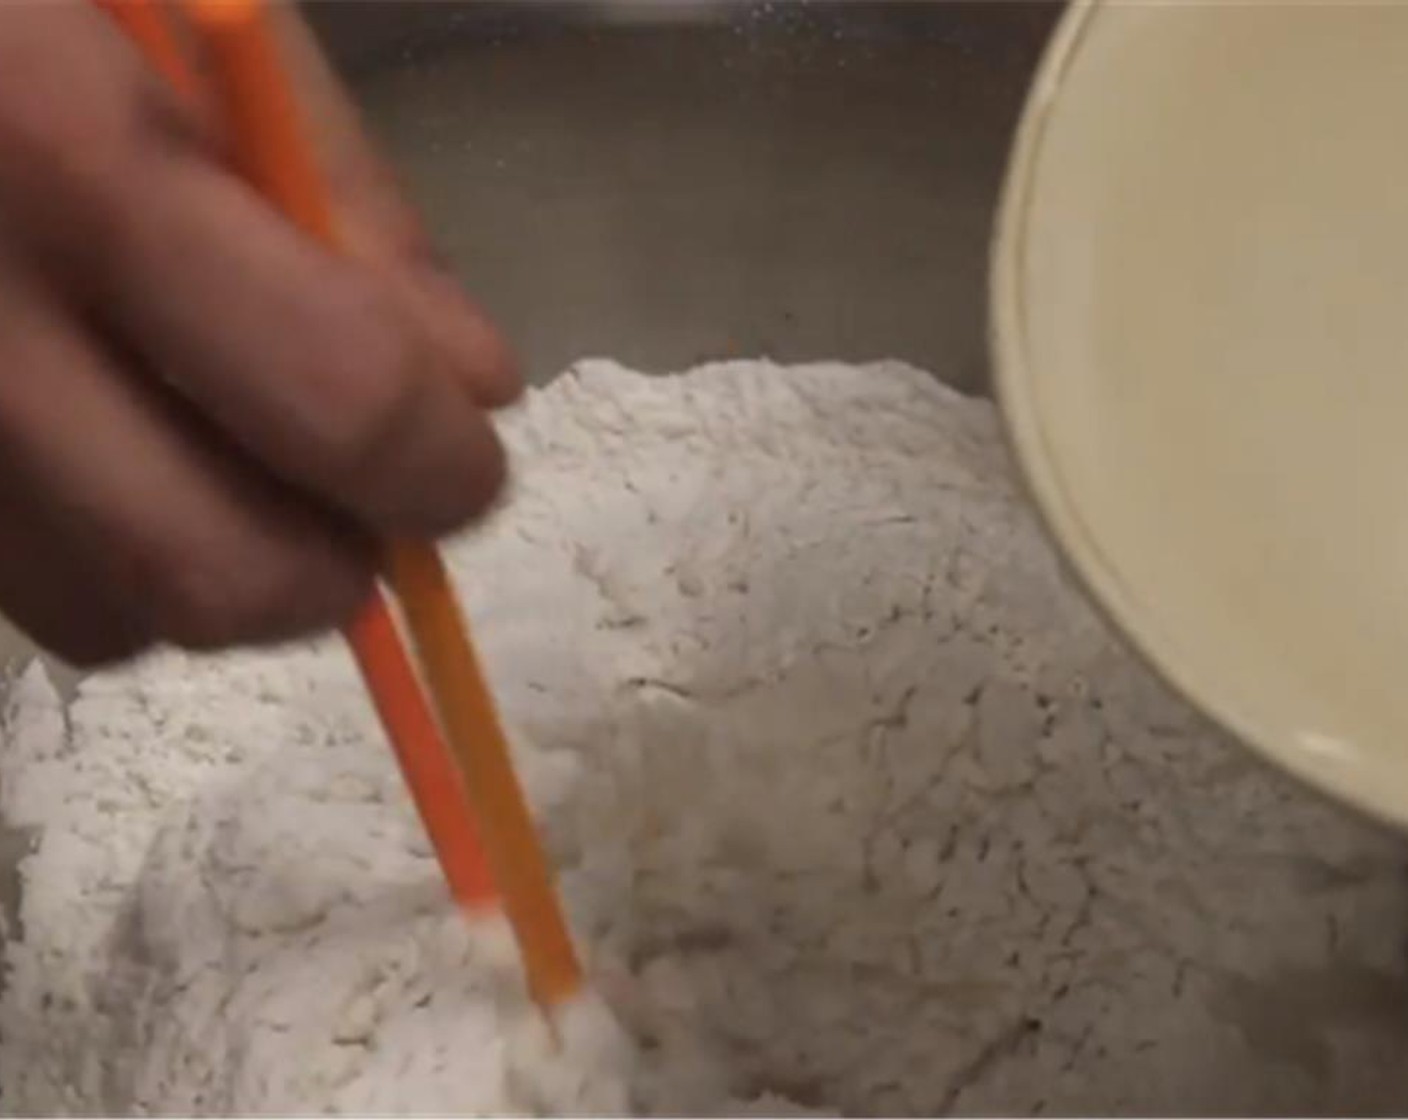 step 1 In a large mixing bowl, add All-Purpose Flour (4 cups). Slowly add Water (2 cups), while gently mixing.